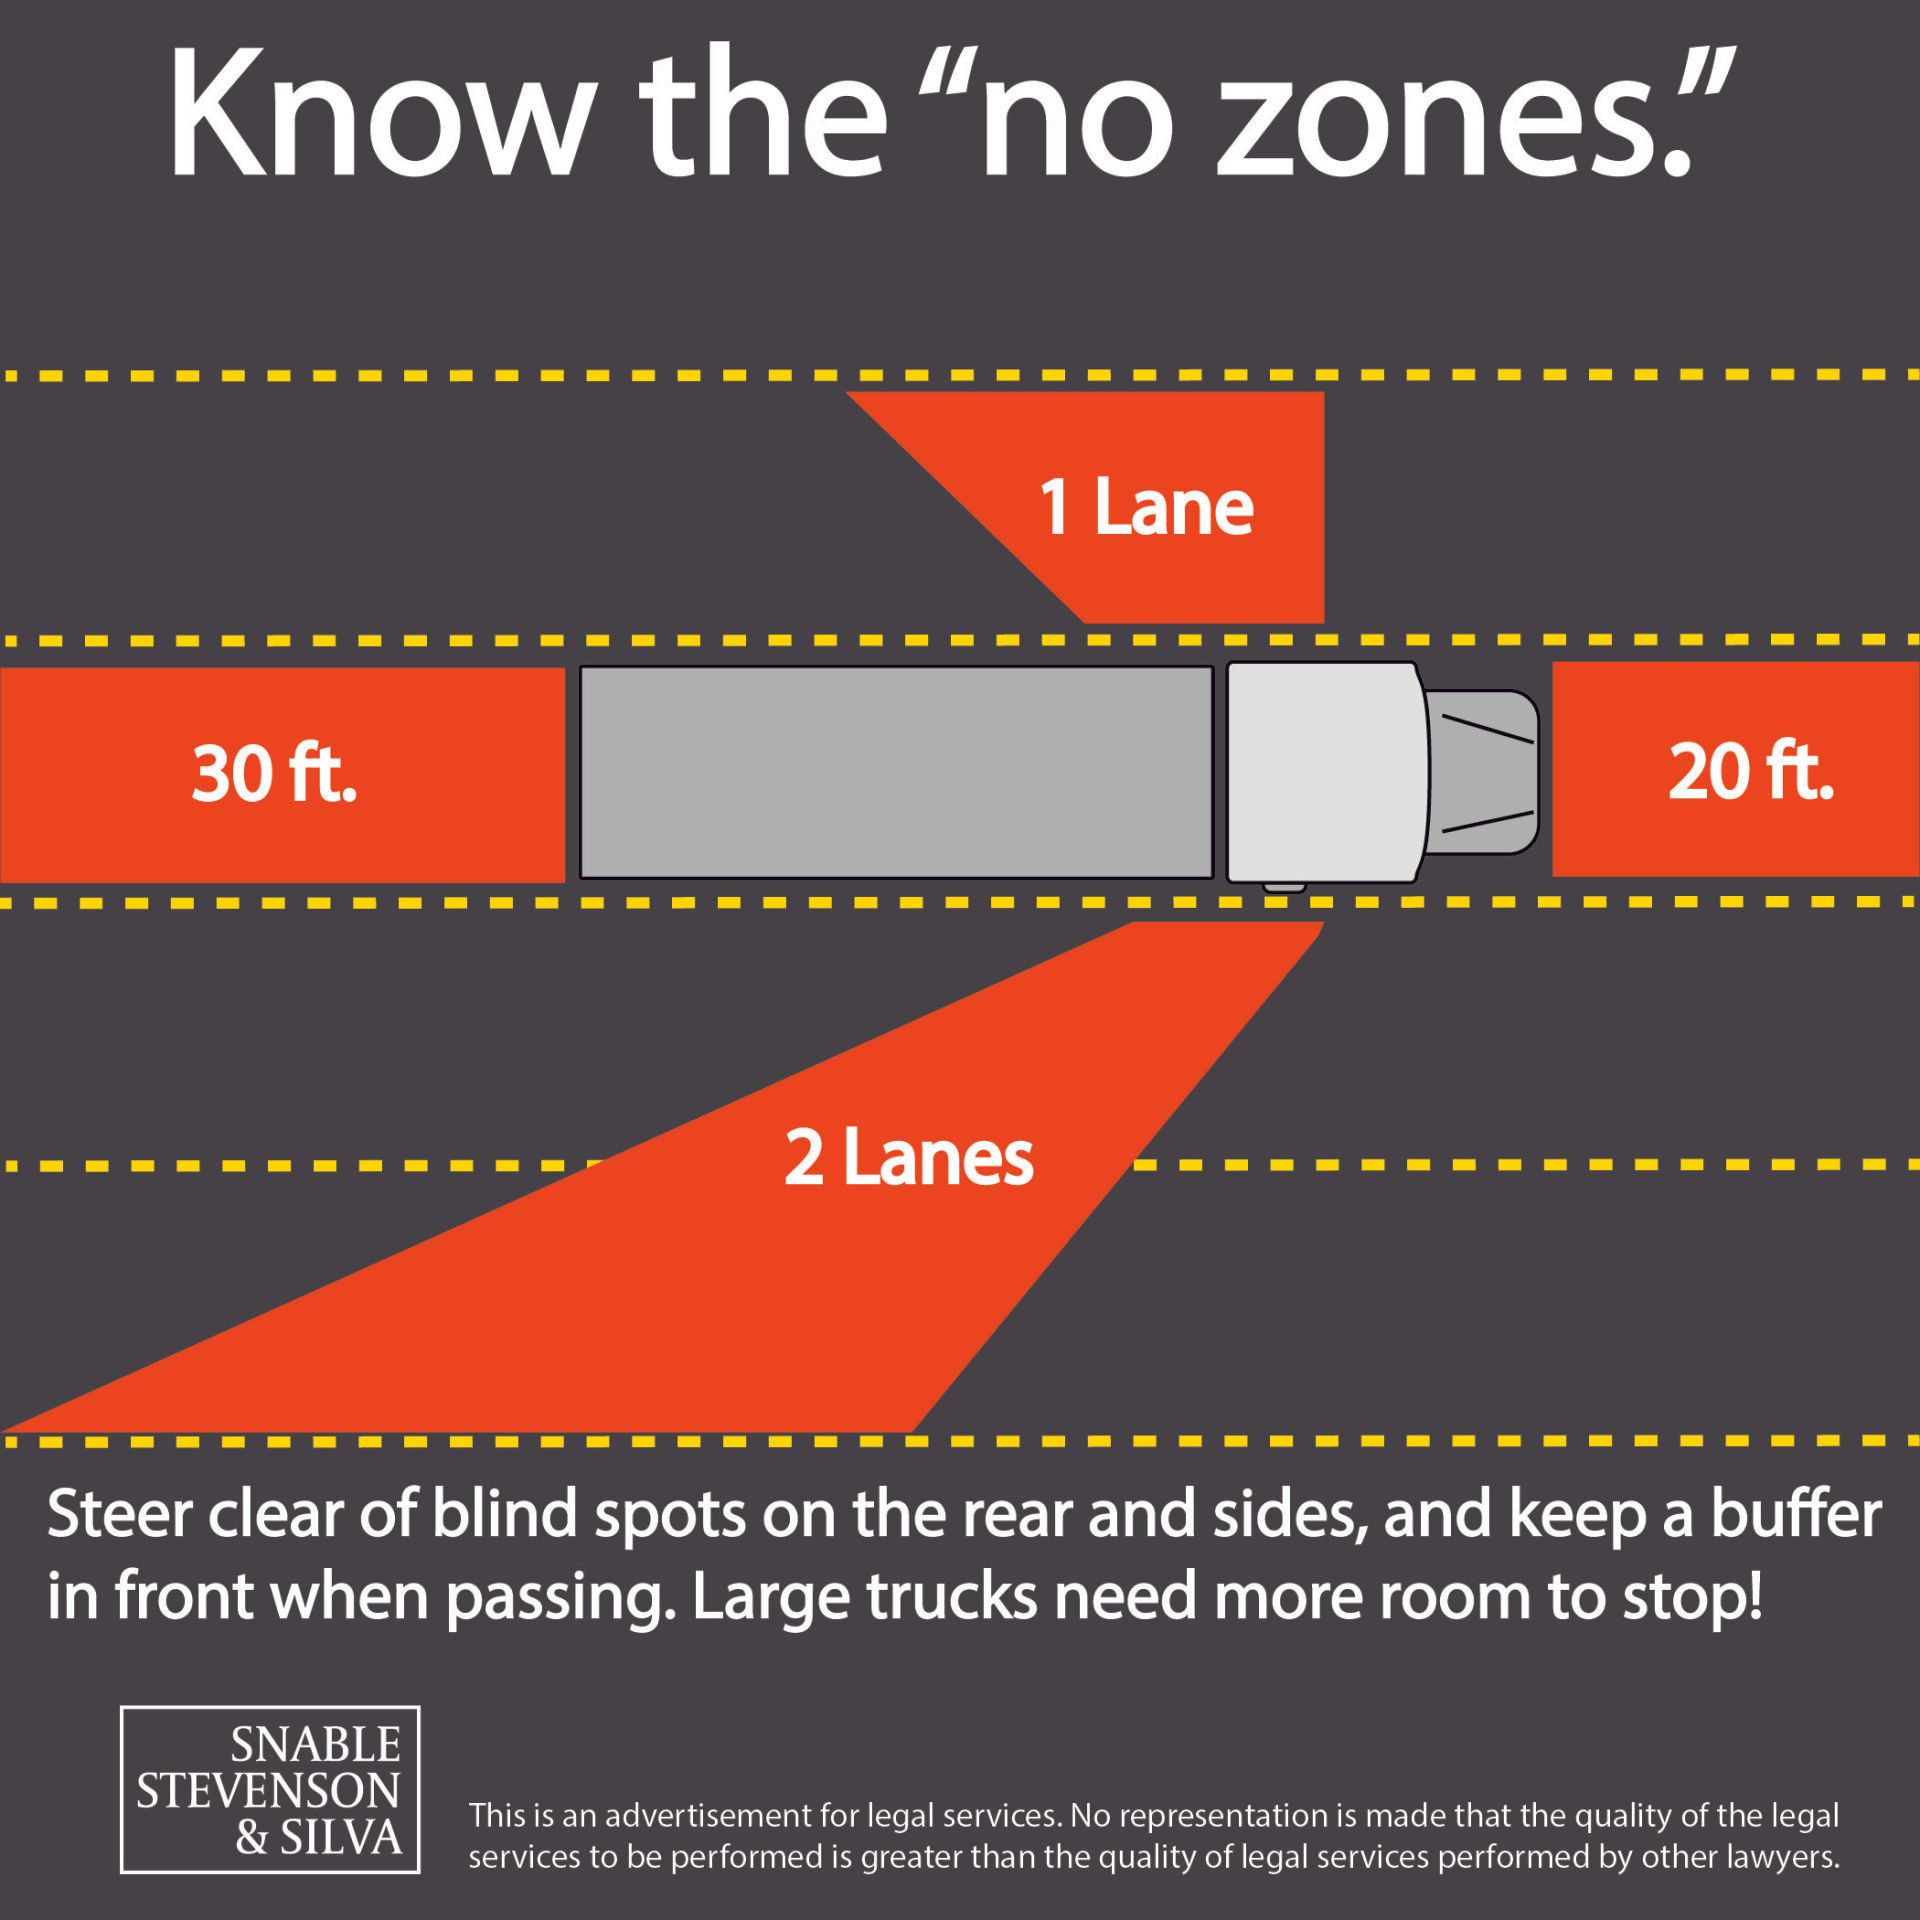 the time you travel in large vehicles' no zones